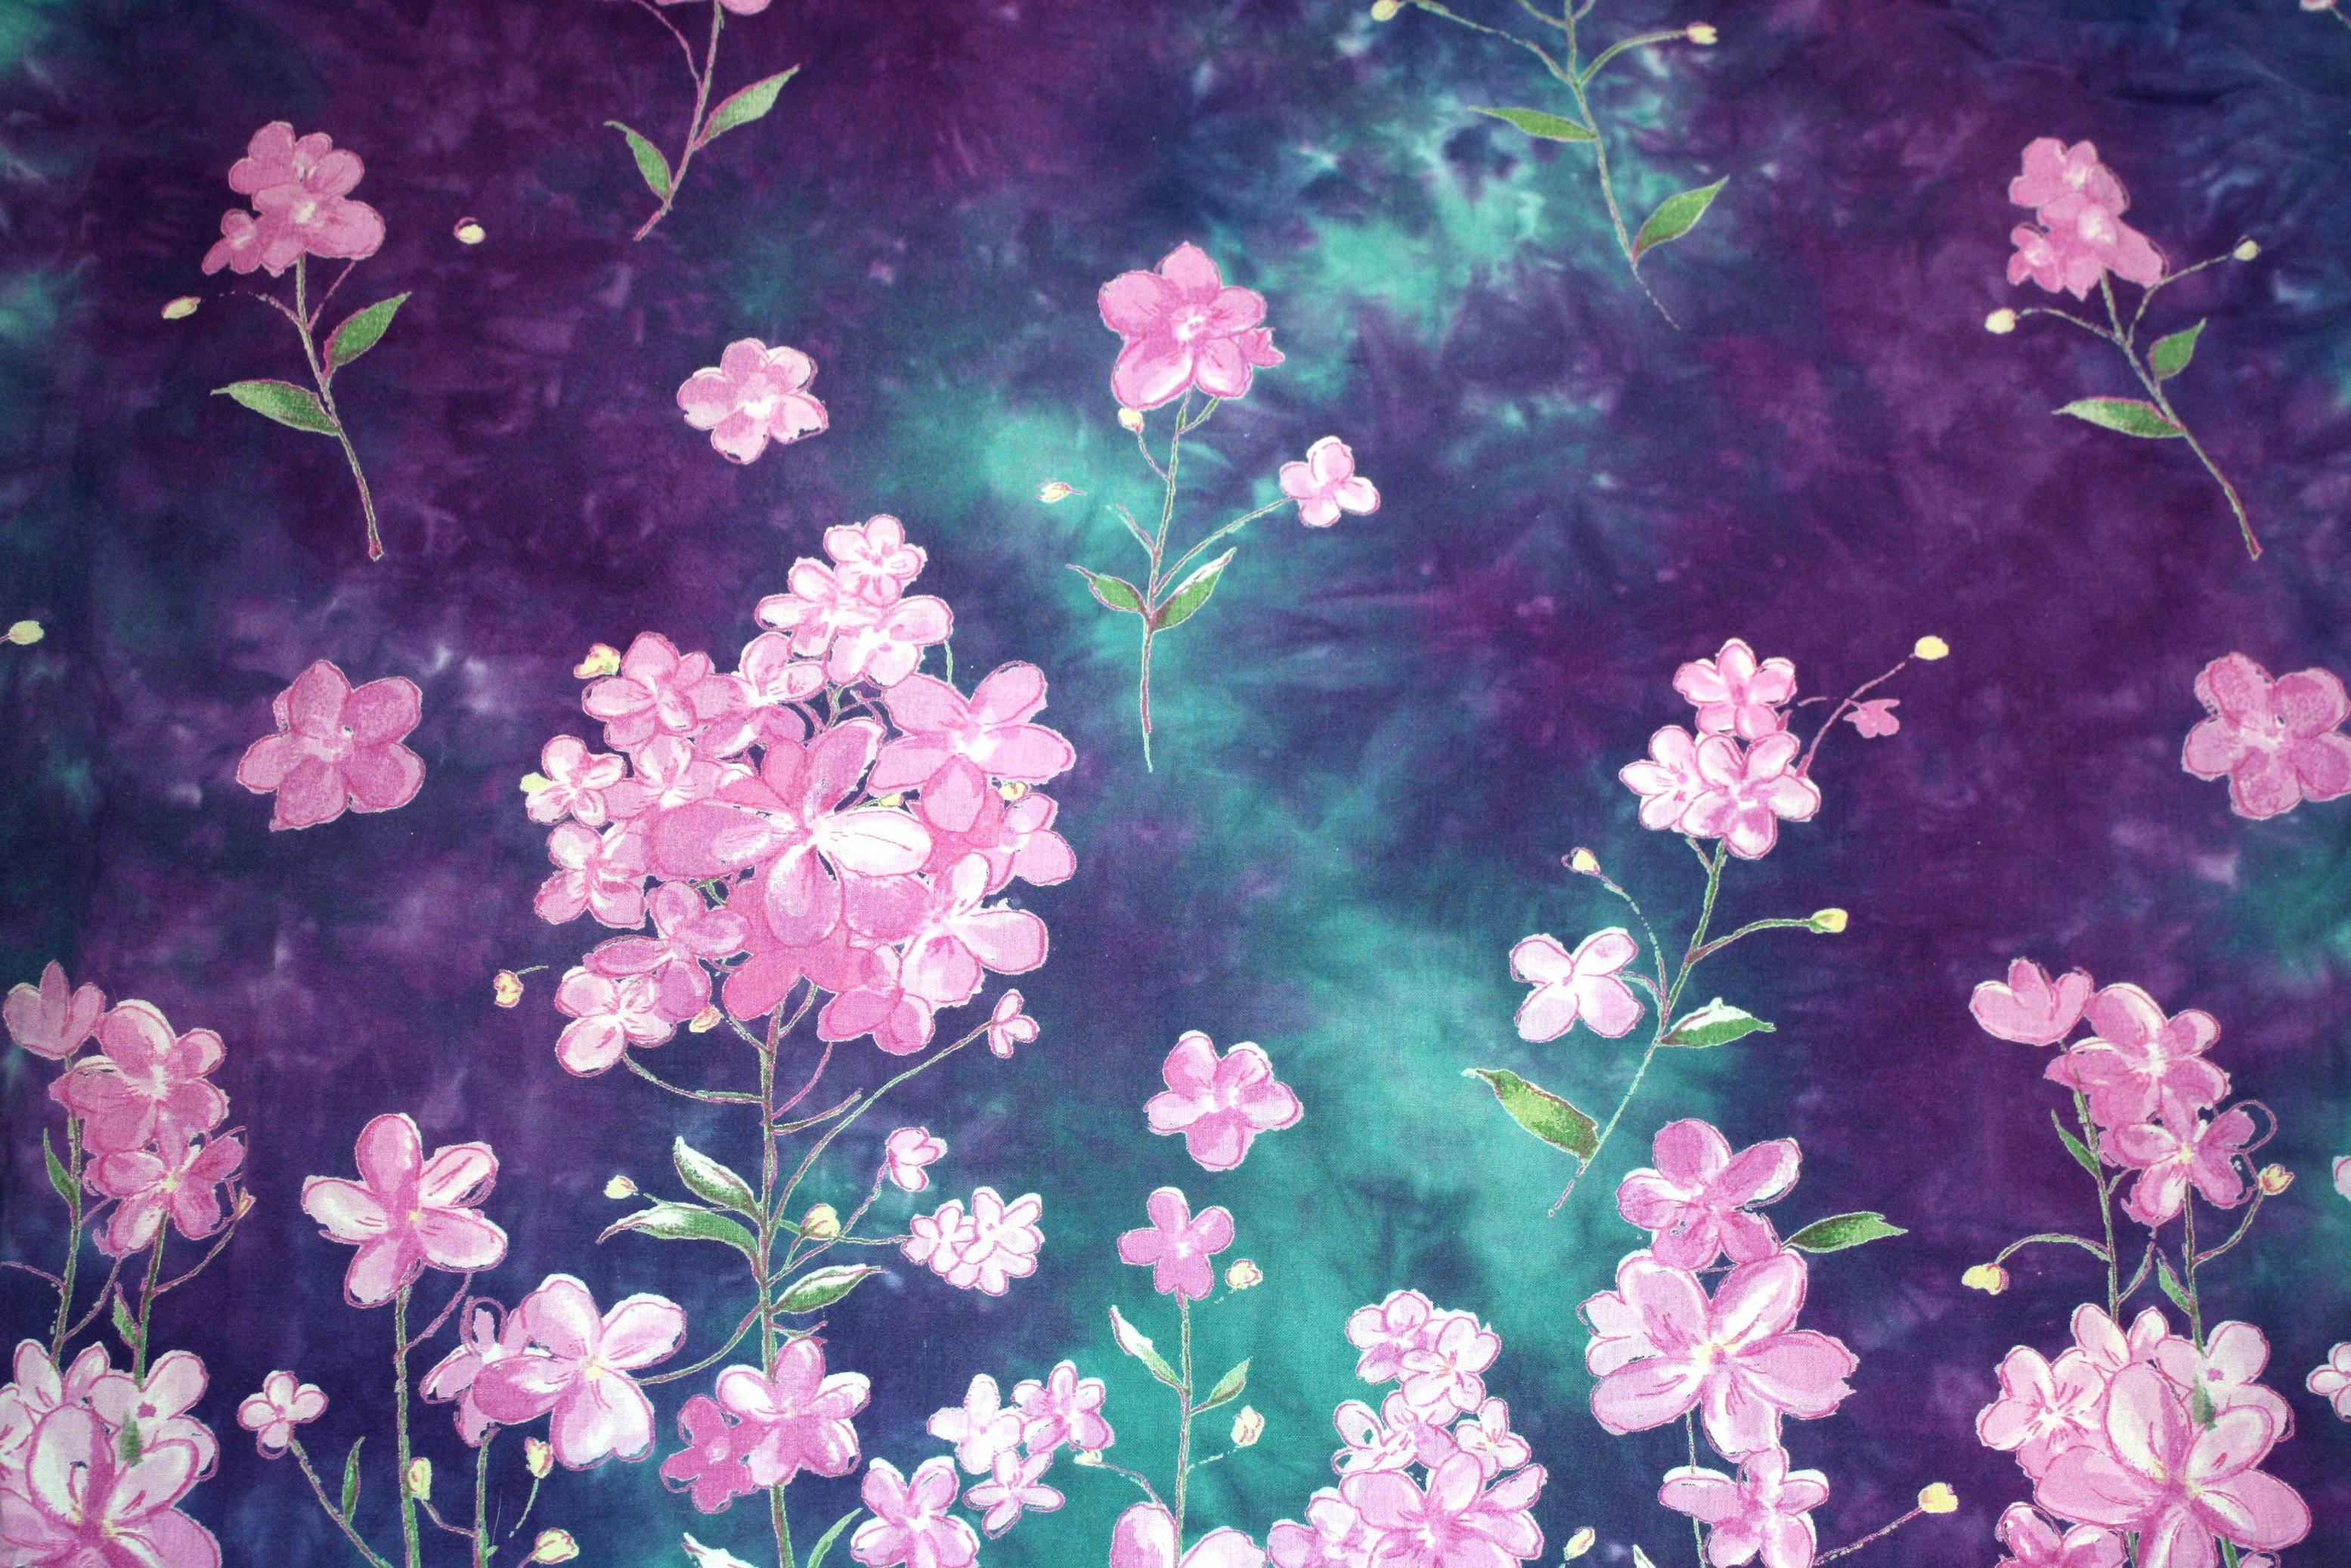 Purple and Green Batik Fabric Texture with Flowers Picture. Free